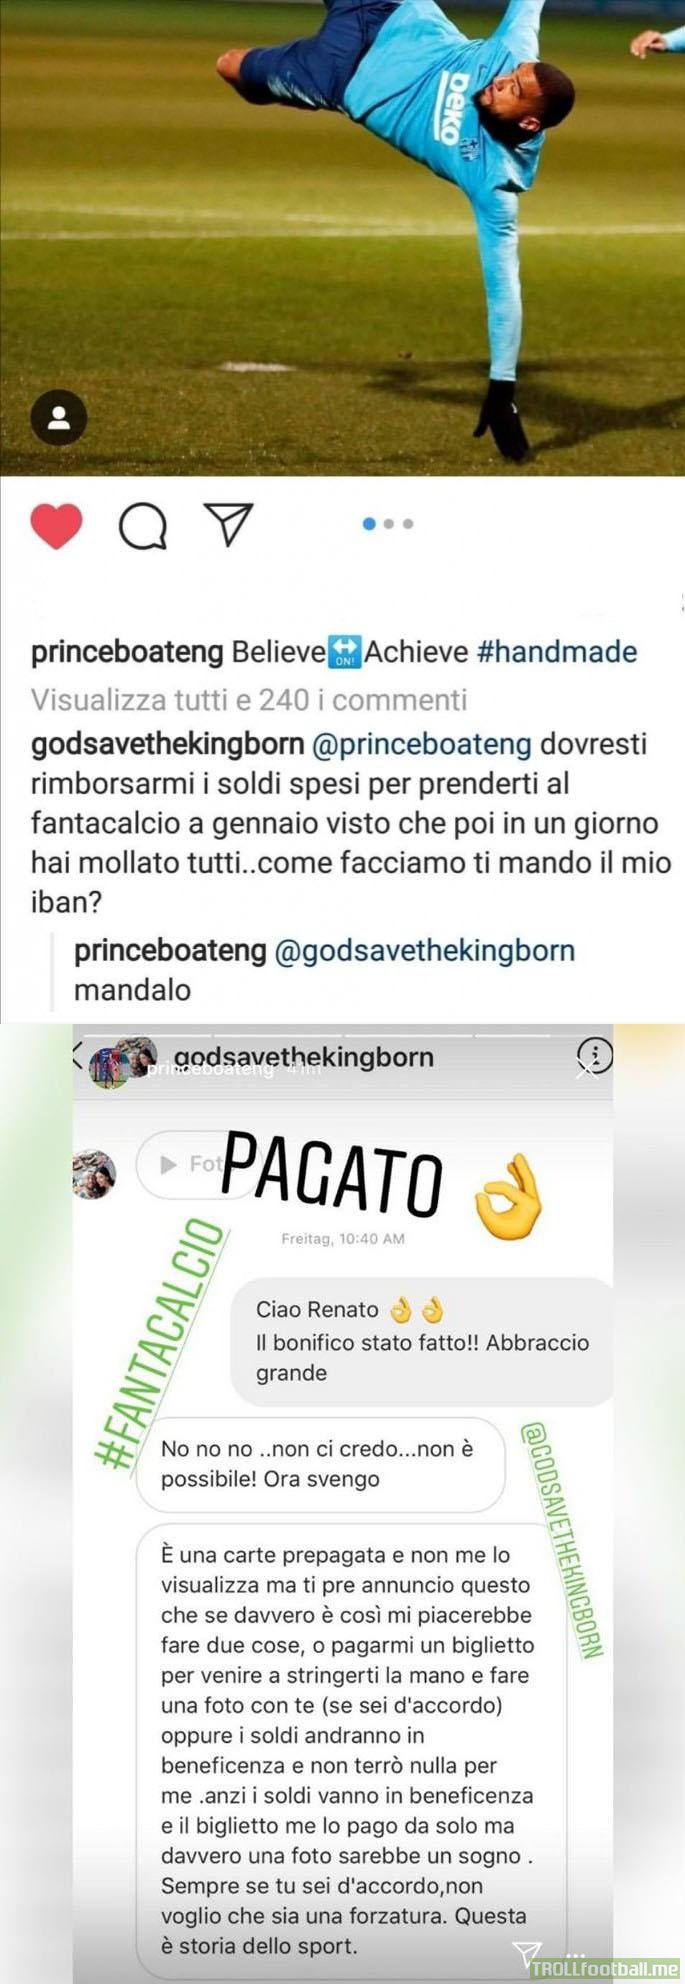 Guy playing fantacalcio to Boateng: "Will you pay me back since I bought you in this window and then you left in one day?" KPB: "Yes". Boateng actually sent money to the supporter, who added money will go to charity since it was of course just a fun message.